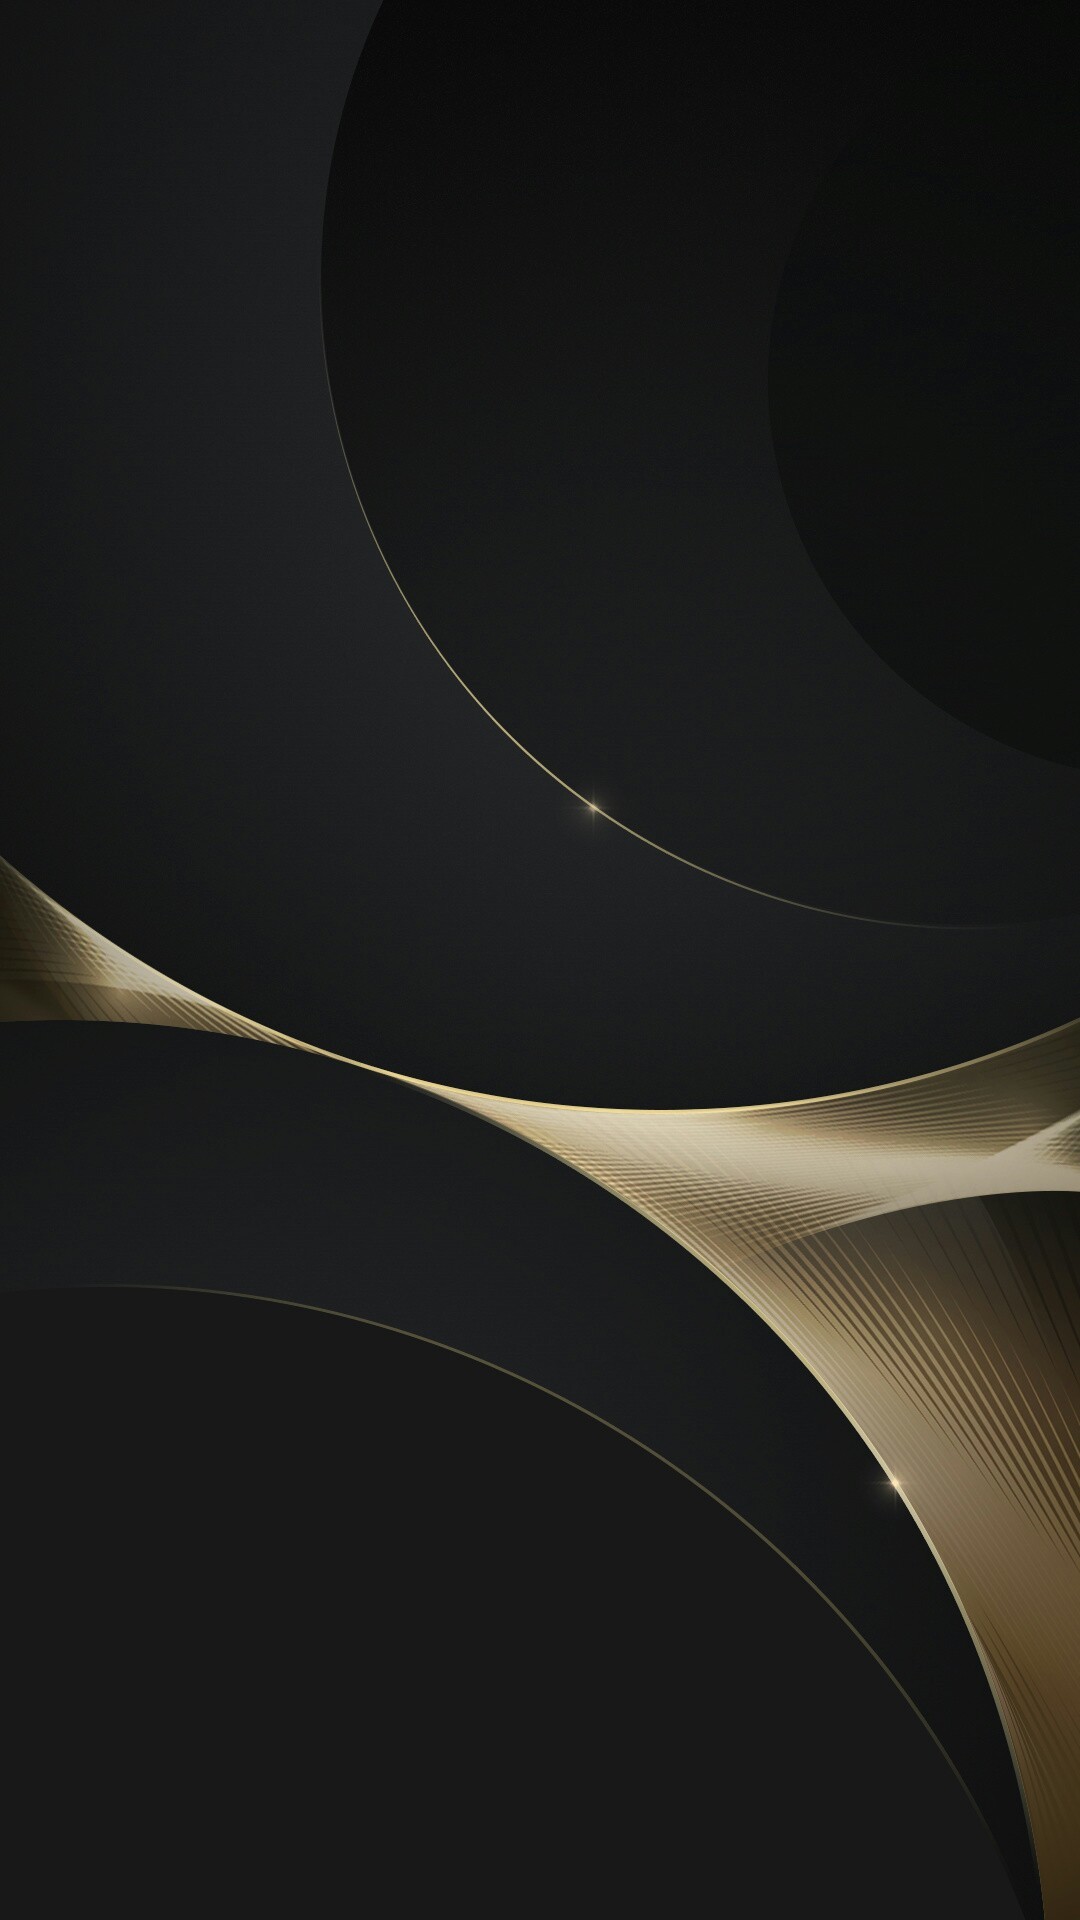 Black And Gold Iphone Wallpaper (72+ Images)